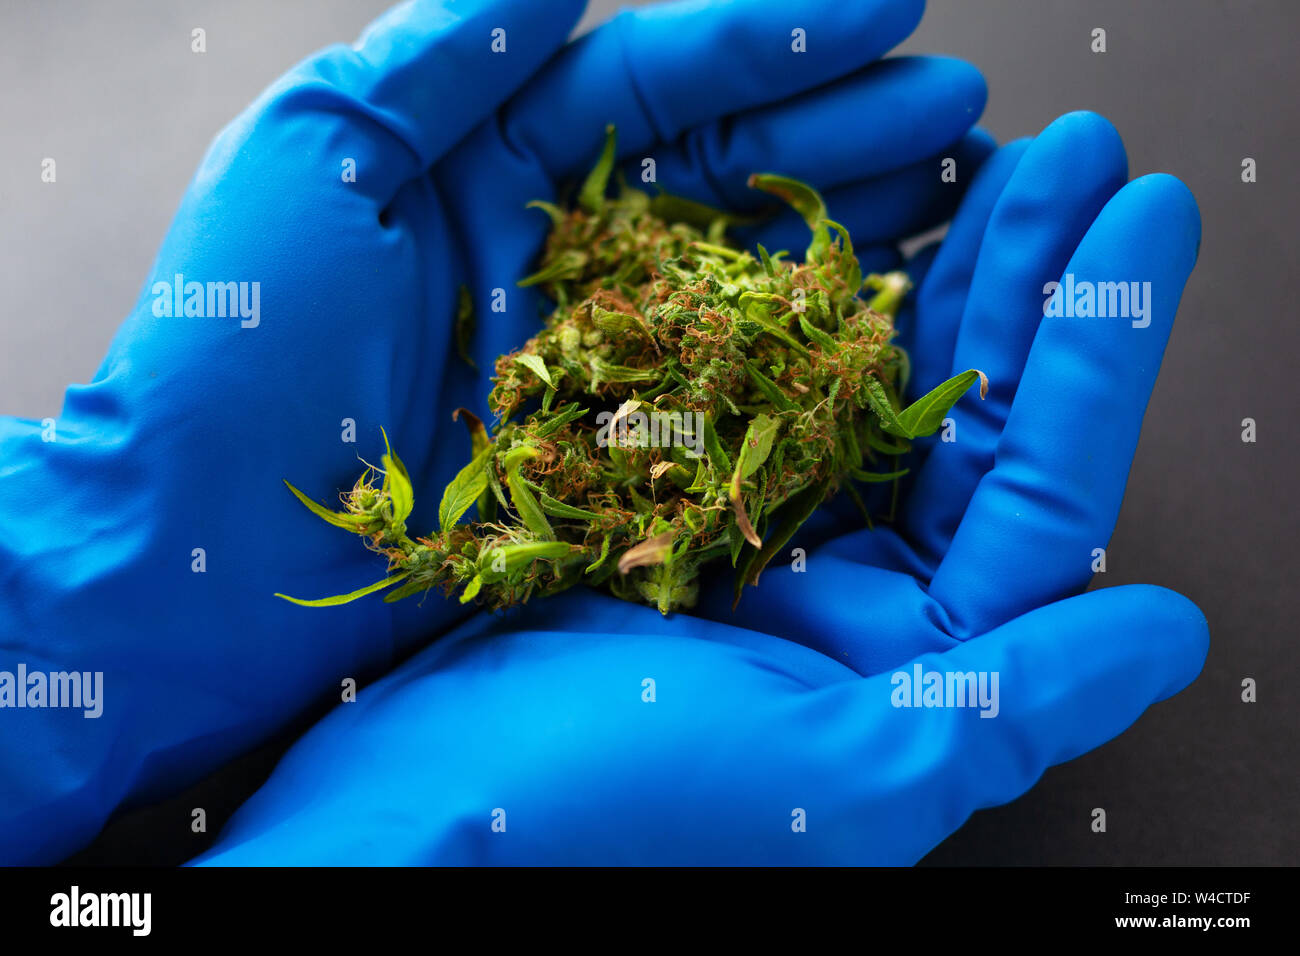 medical marijuana in the hands of a doctor in blue medical gloves. cannabis buds in the hands of a general practitioner Stock Photo